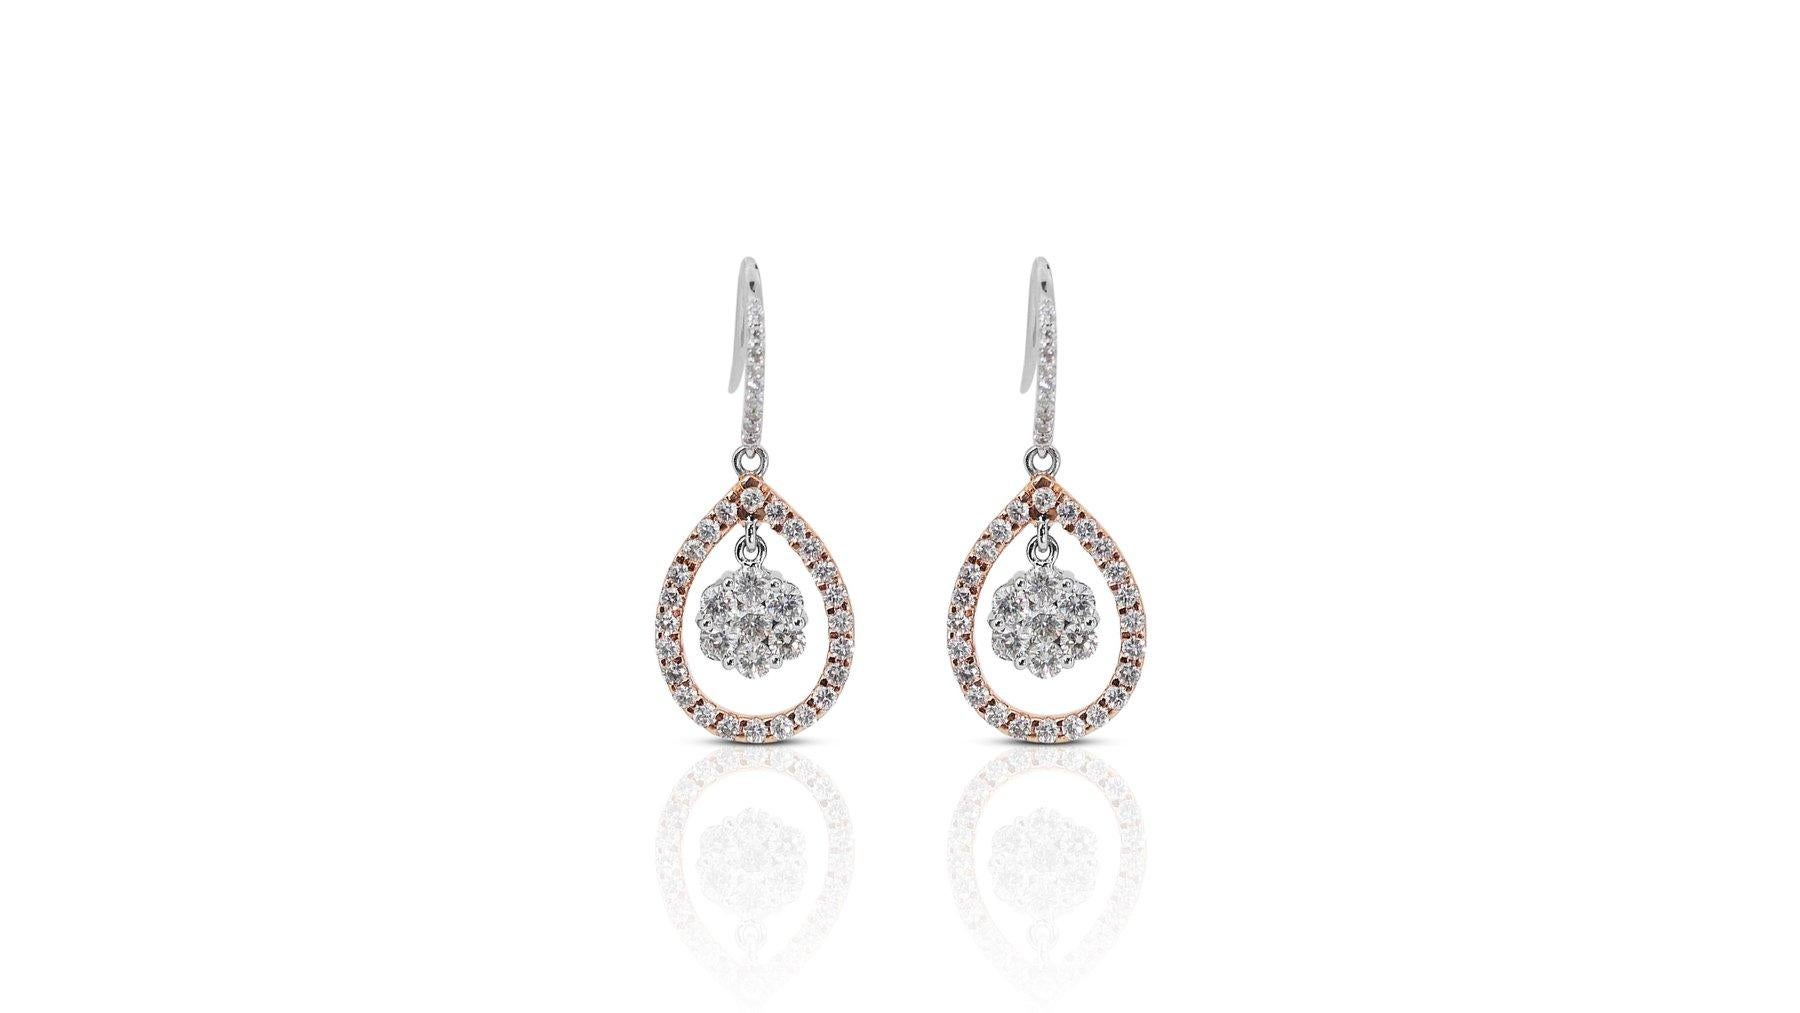 Stunning Diamond Earrings with Dazzling 2.35 ct Round Brilliant cut Diamond For Sale